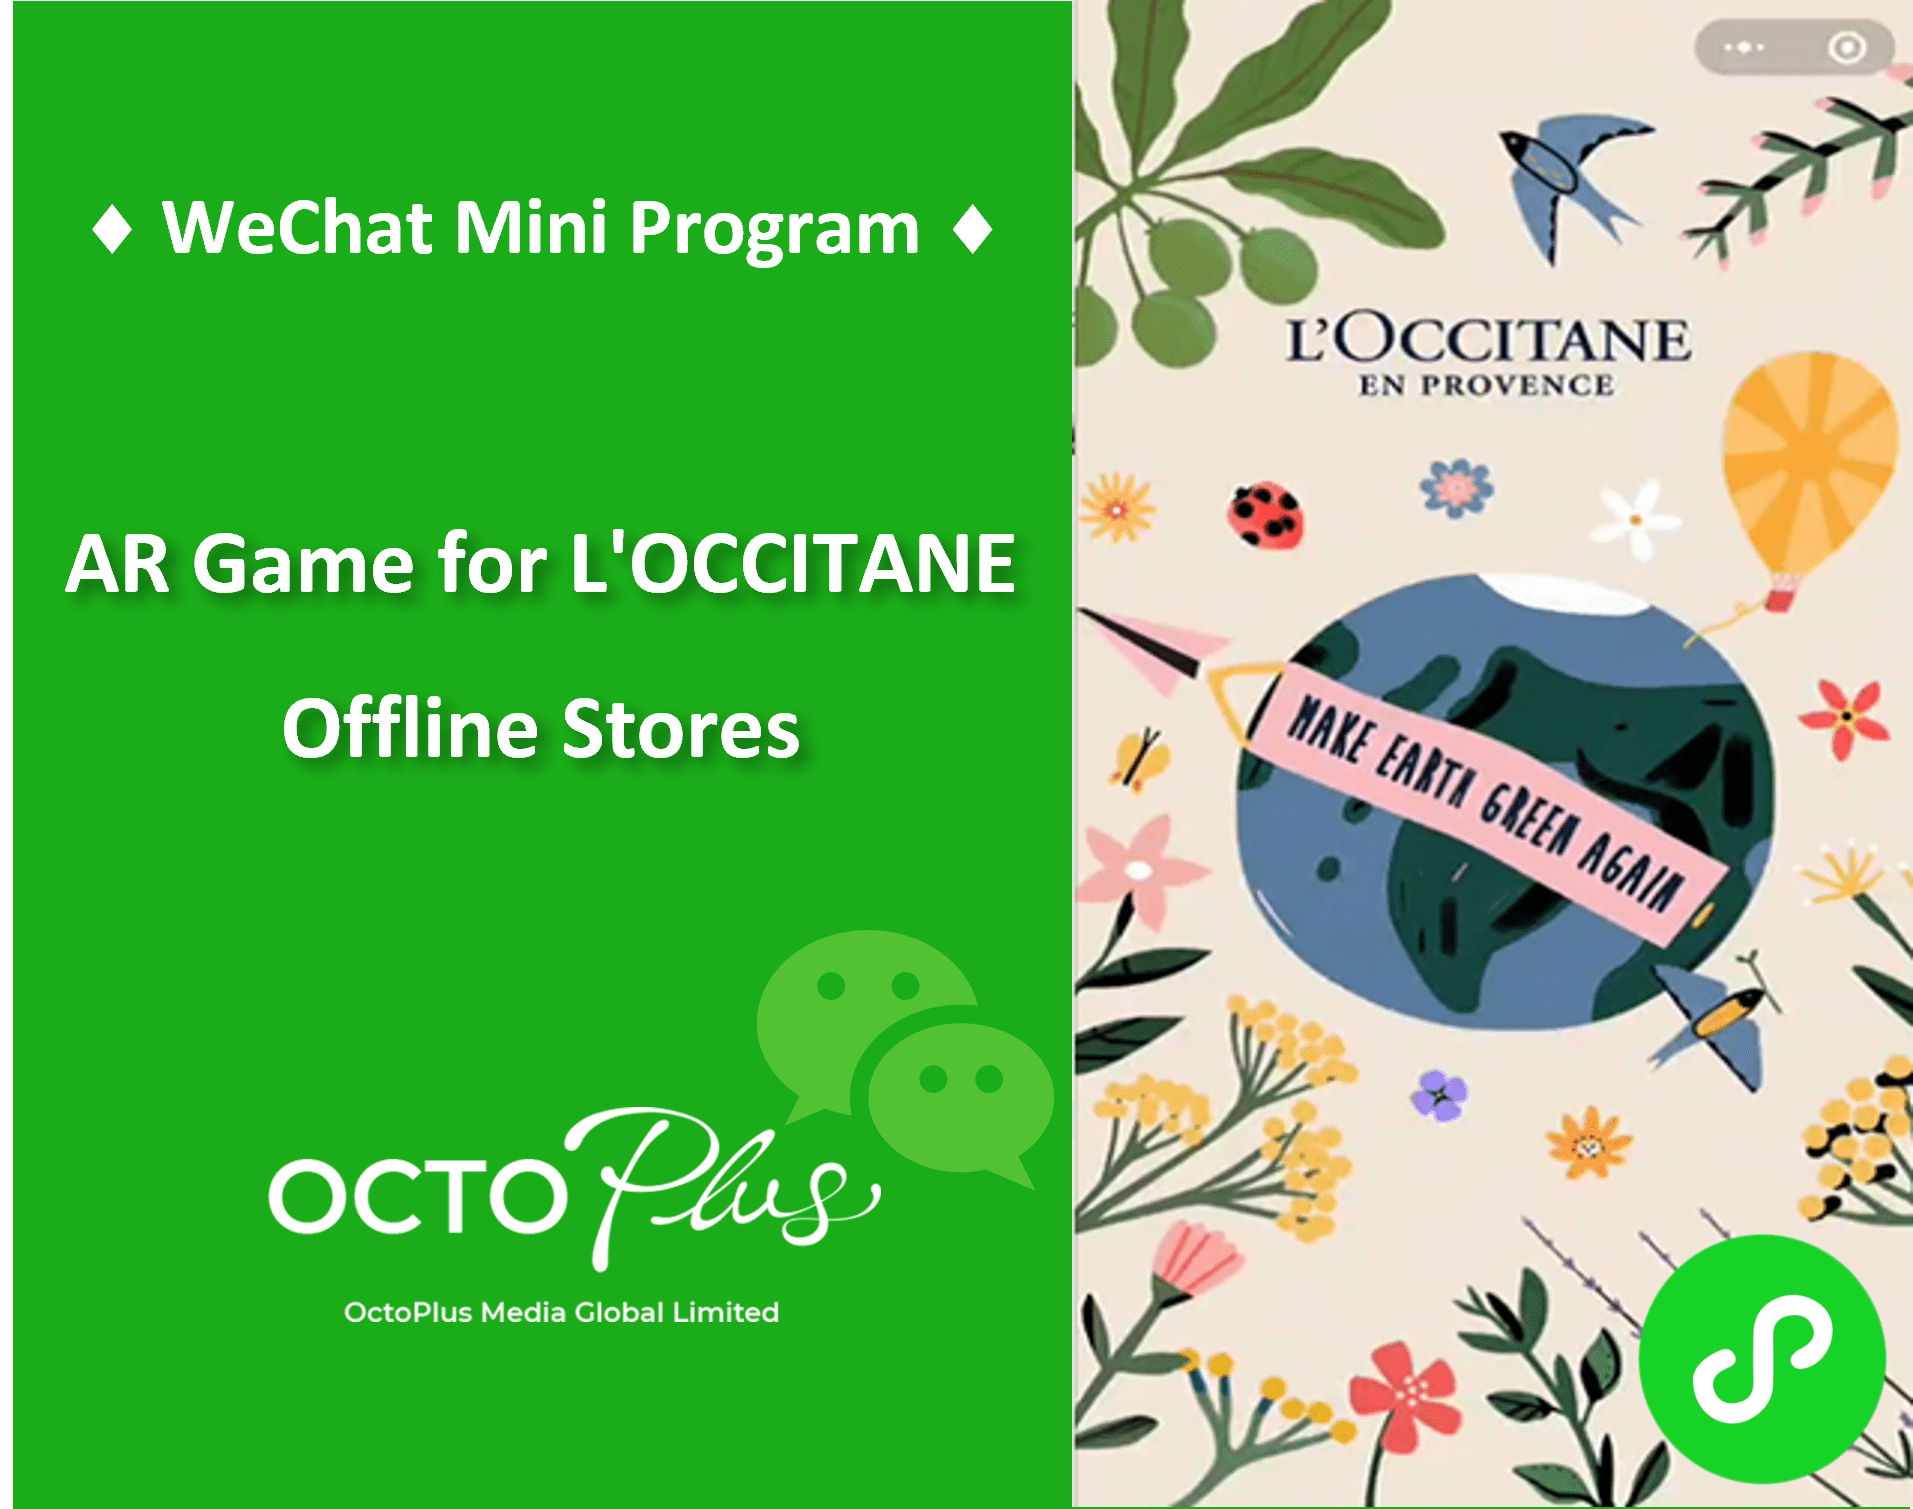 AR Games WeChat Miniprogram Development to Engage with Offline Shoppers - L’Occitane